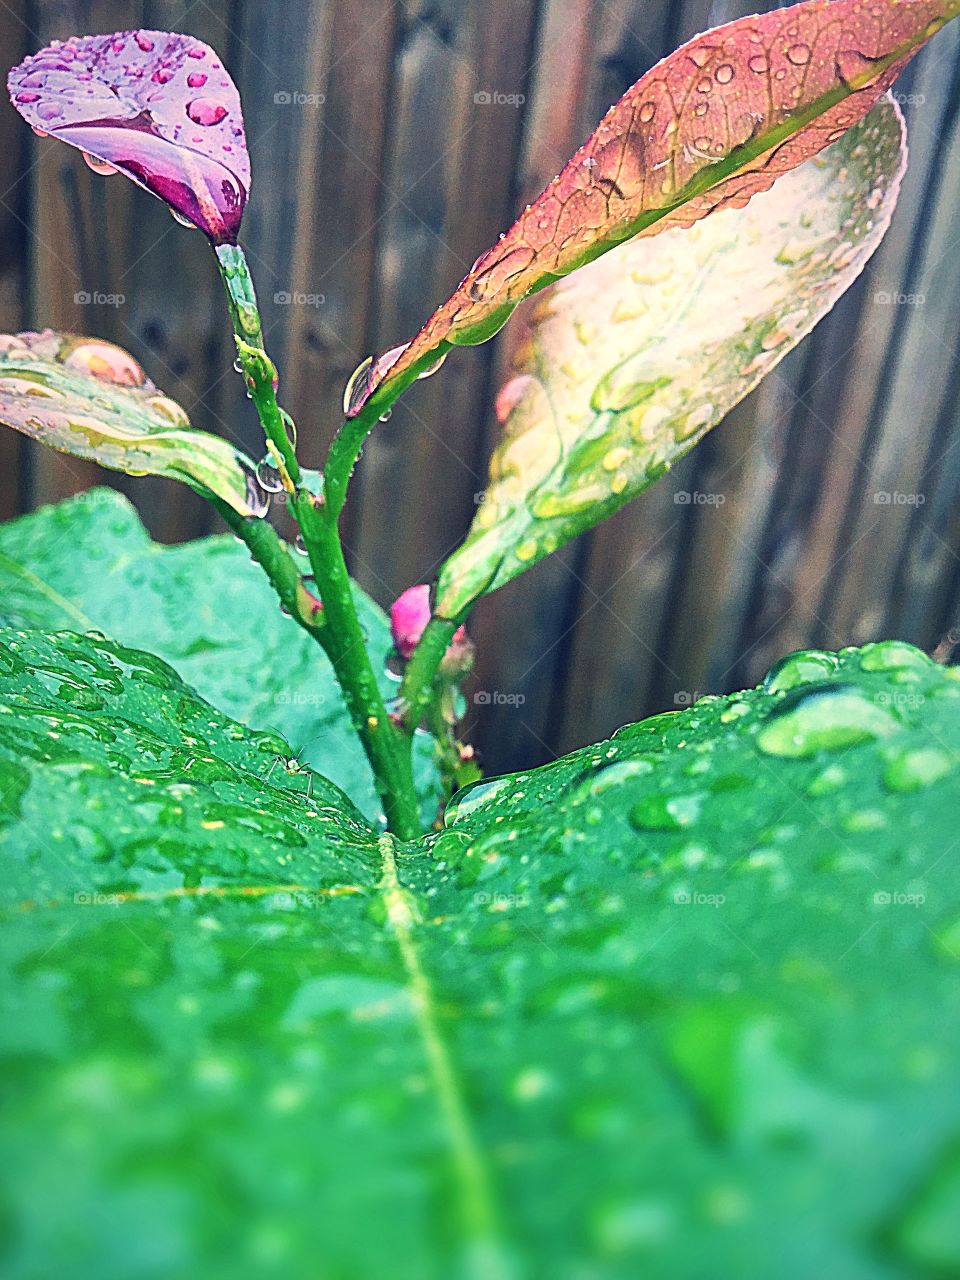 This is a photo after it rained. It has five leaves in focus. As the leaves go further down the stem they get lighter in colour.